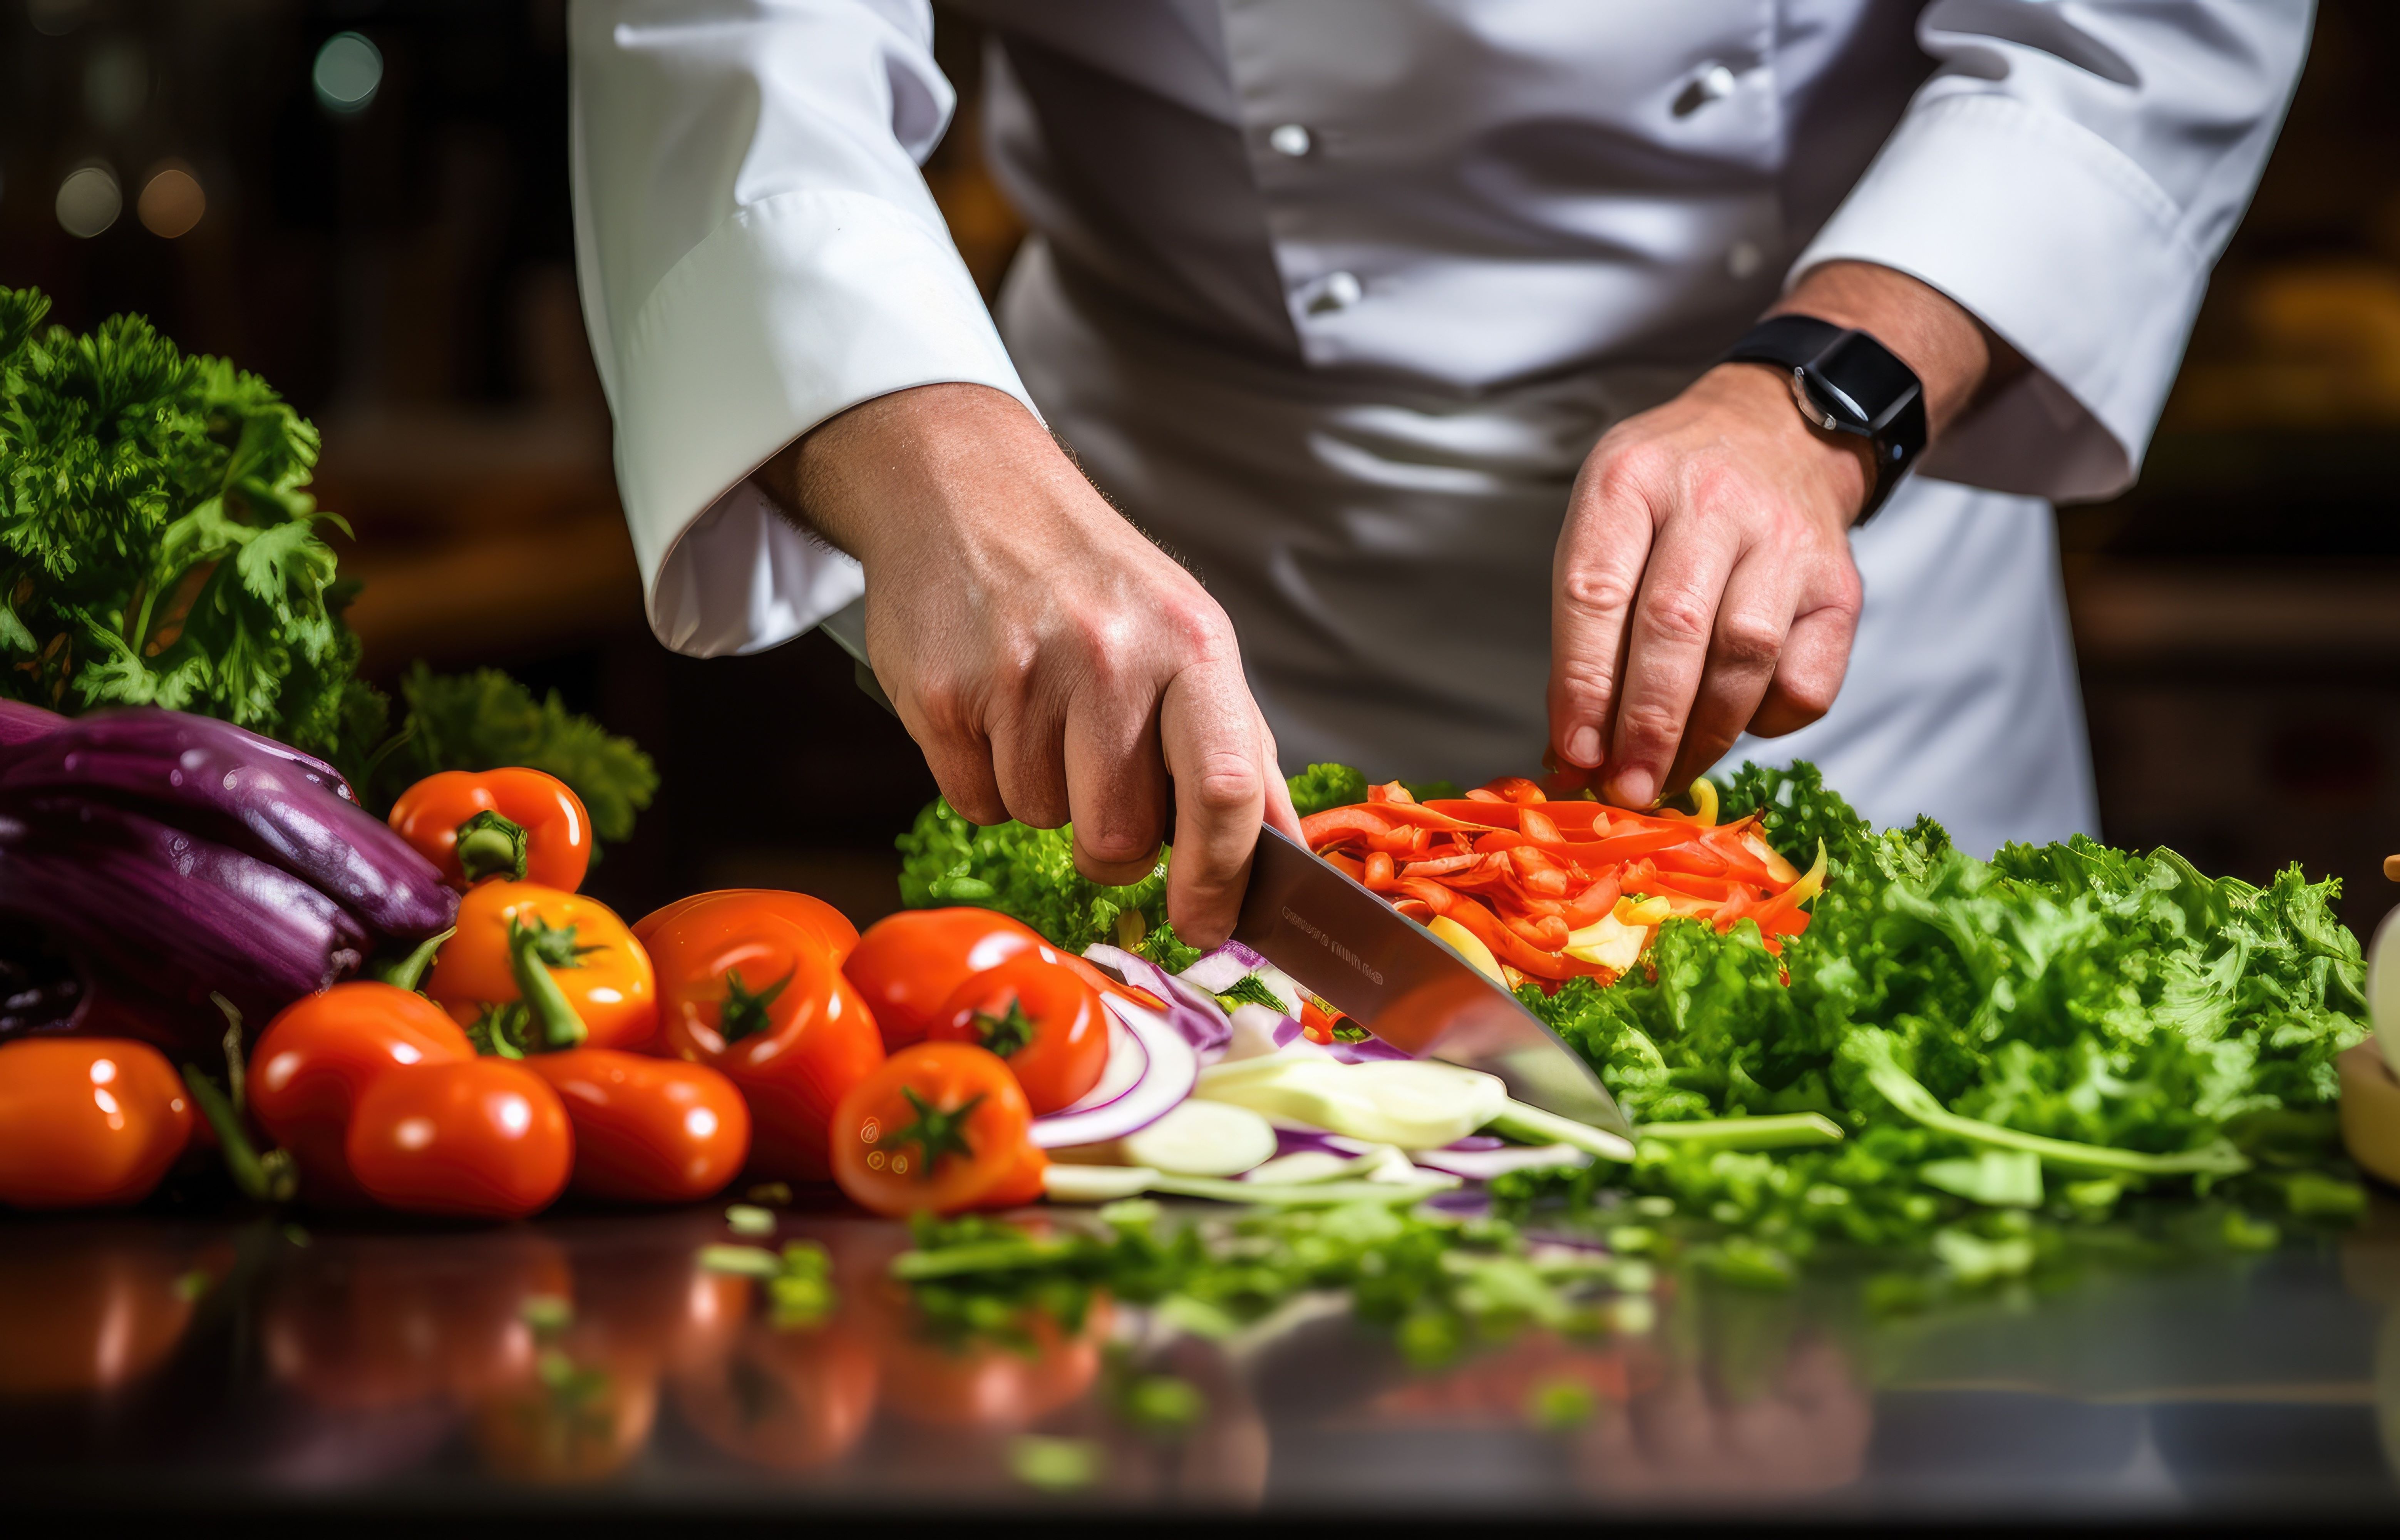 Four Management Practices to Ensure Food Safety in Your Kitchen